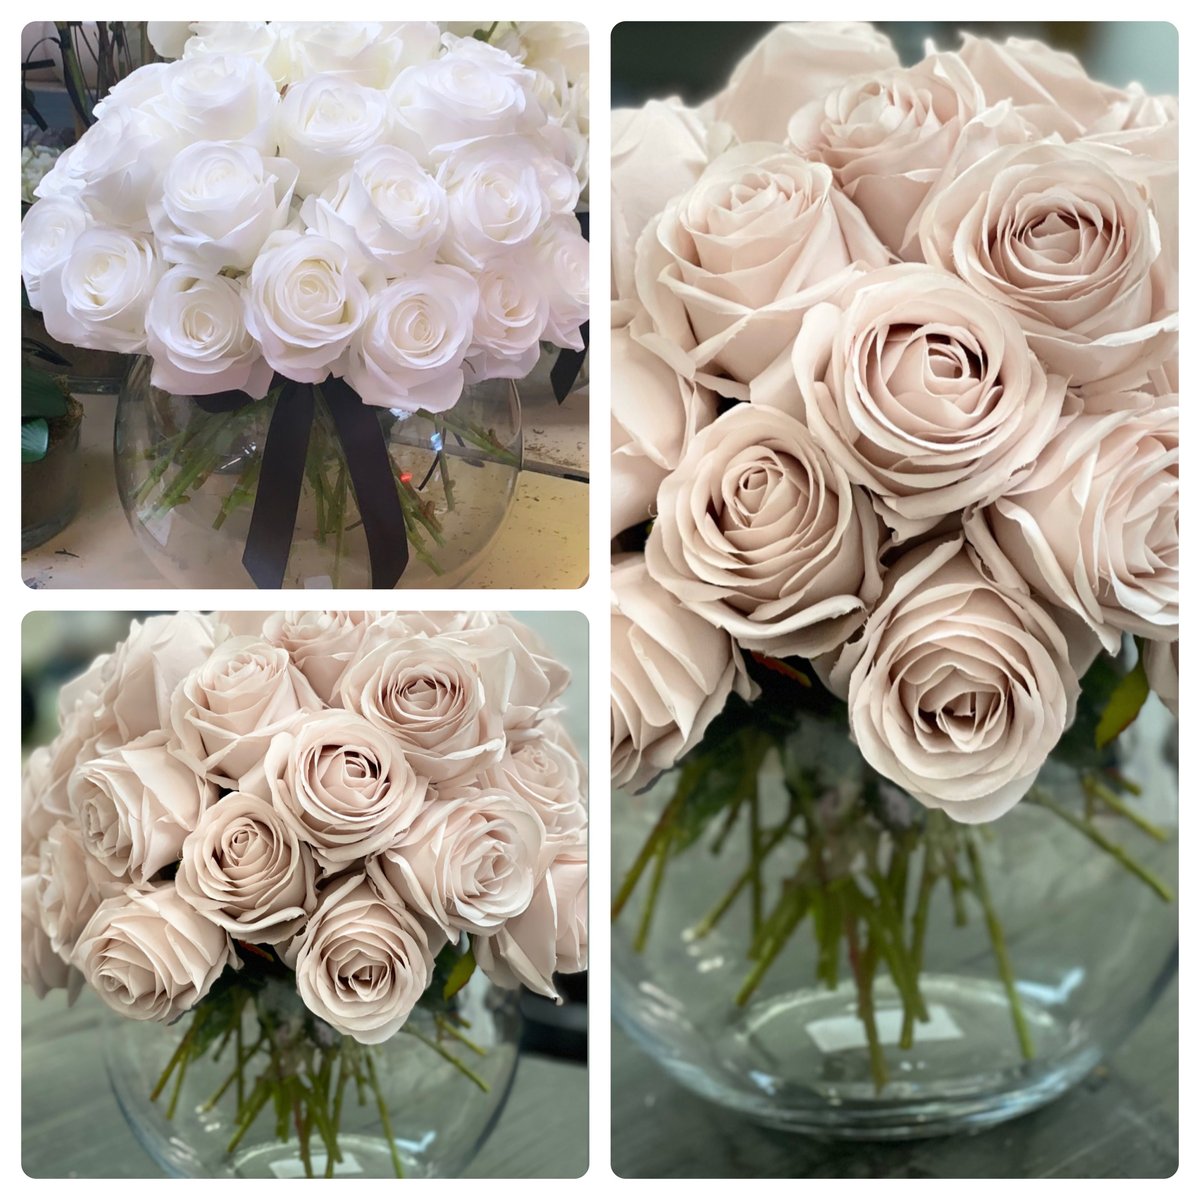 Image of Roses Bowls (large roses) - Nude / Mink / white / pink